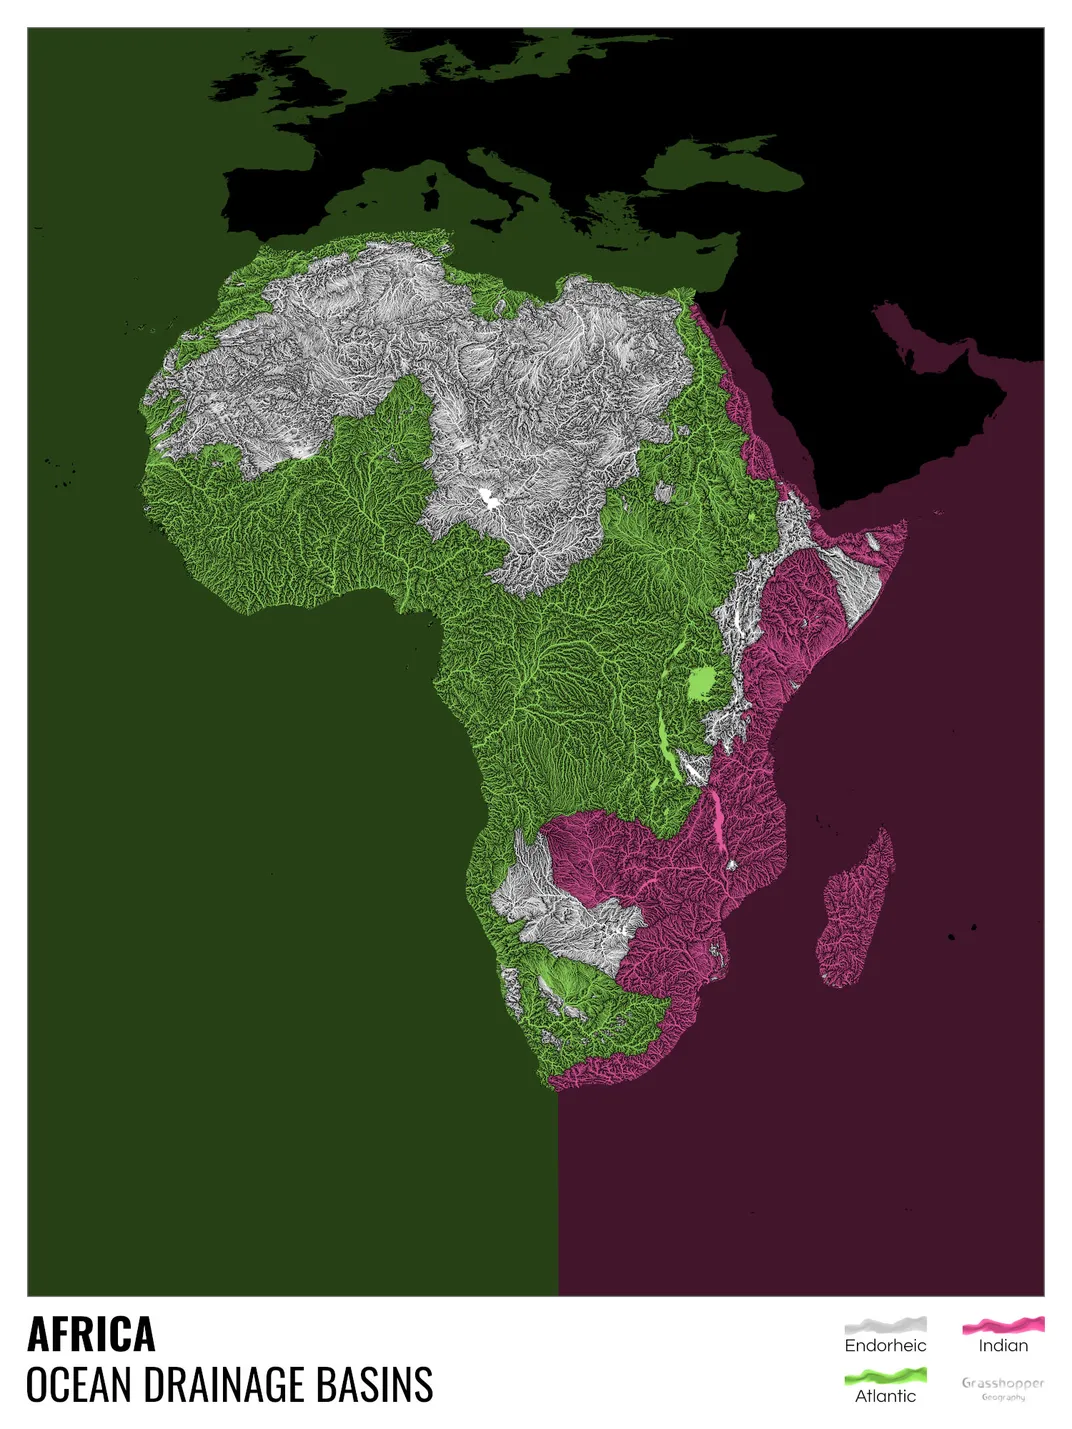 Ocean Drainage Basin Map of Africa